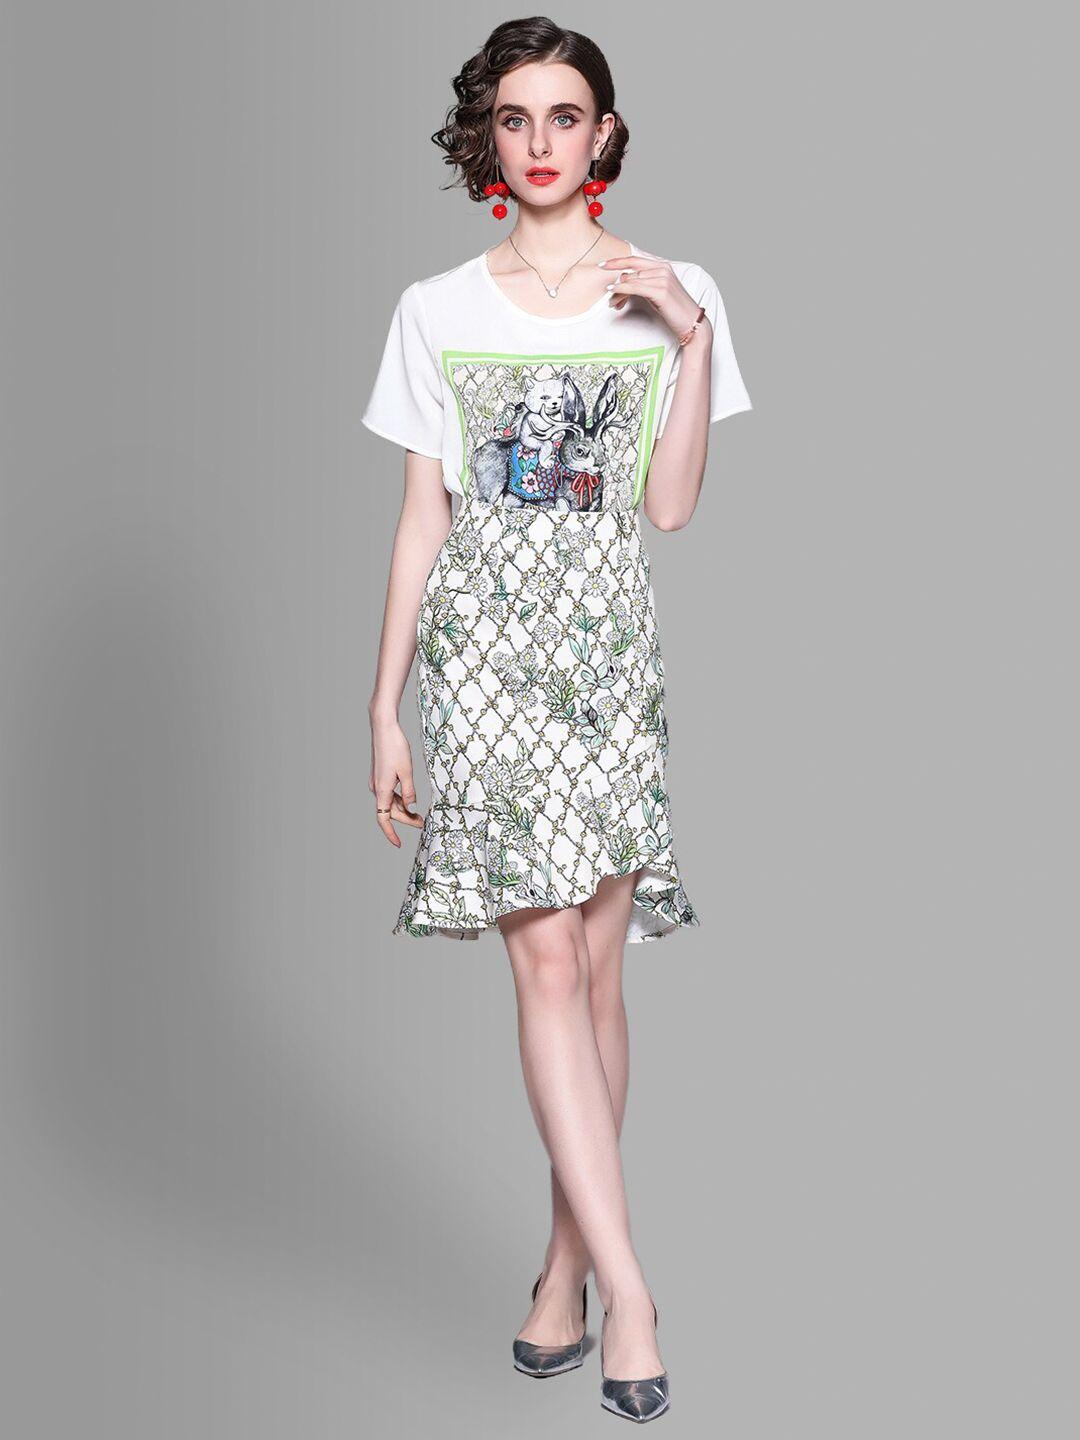 jc collection women white & green printed t-shirt with skirt co-ords set